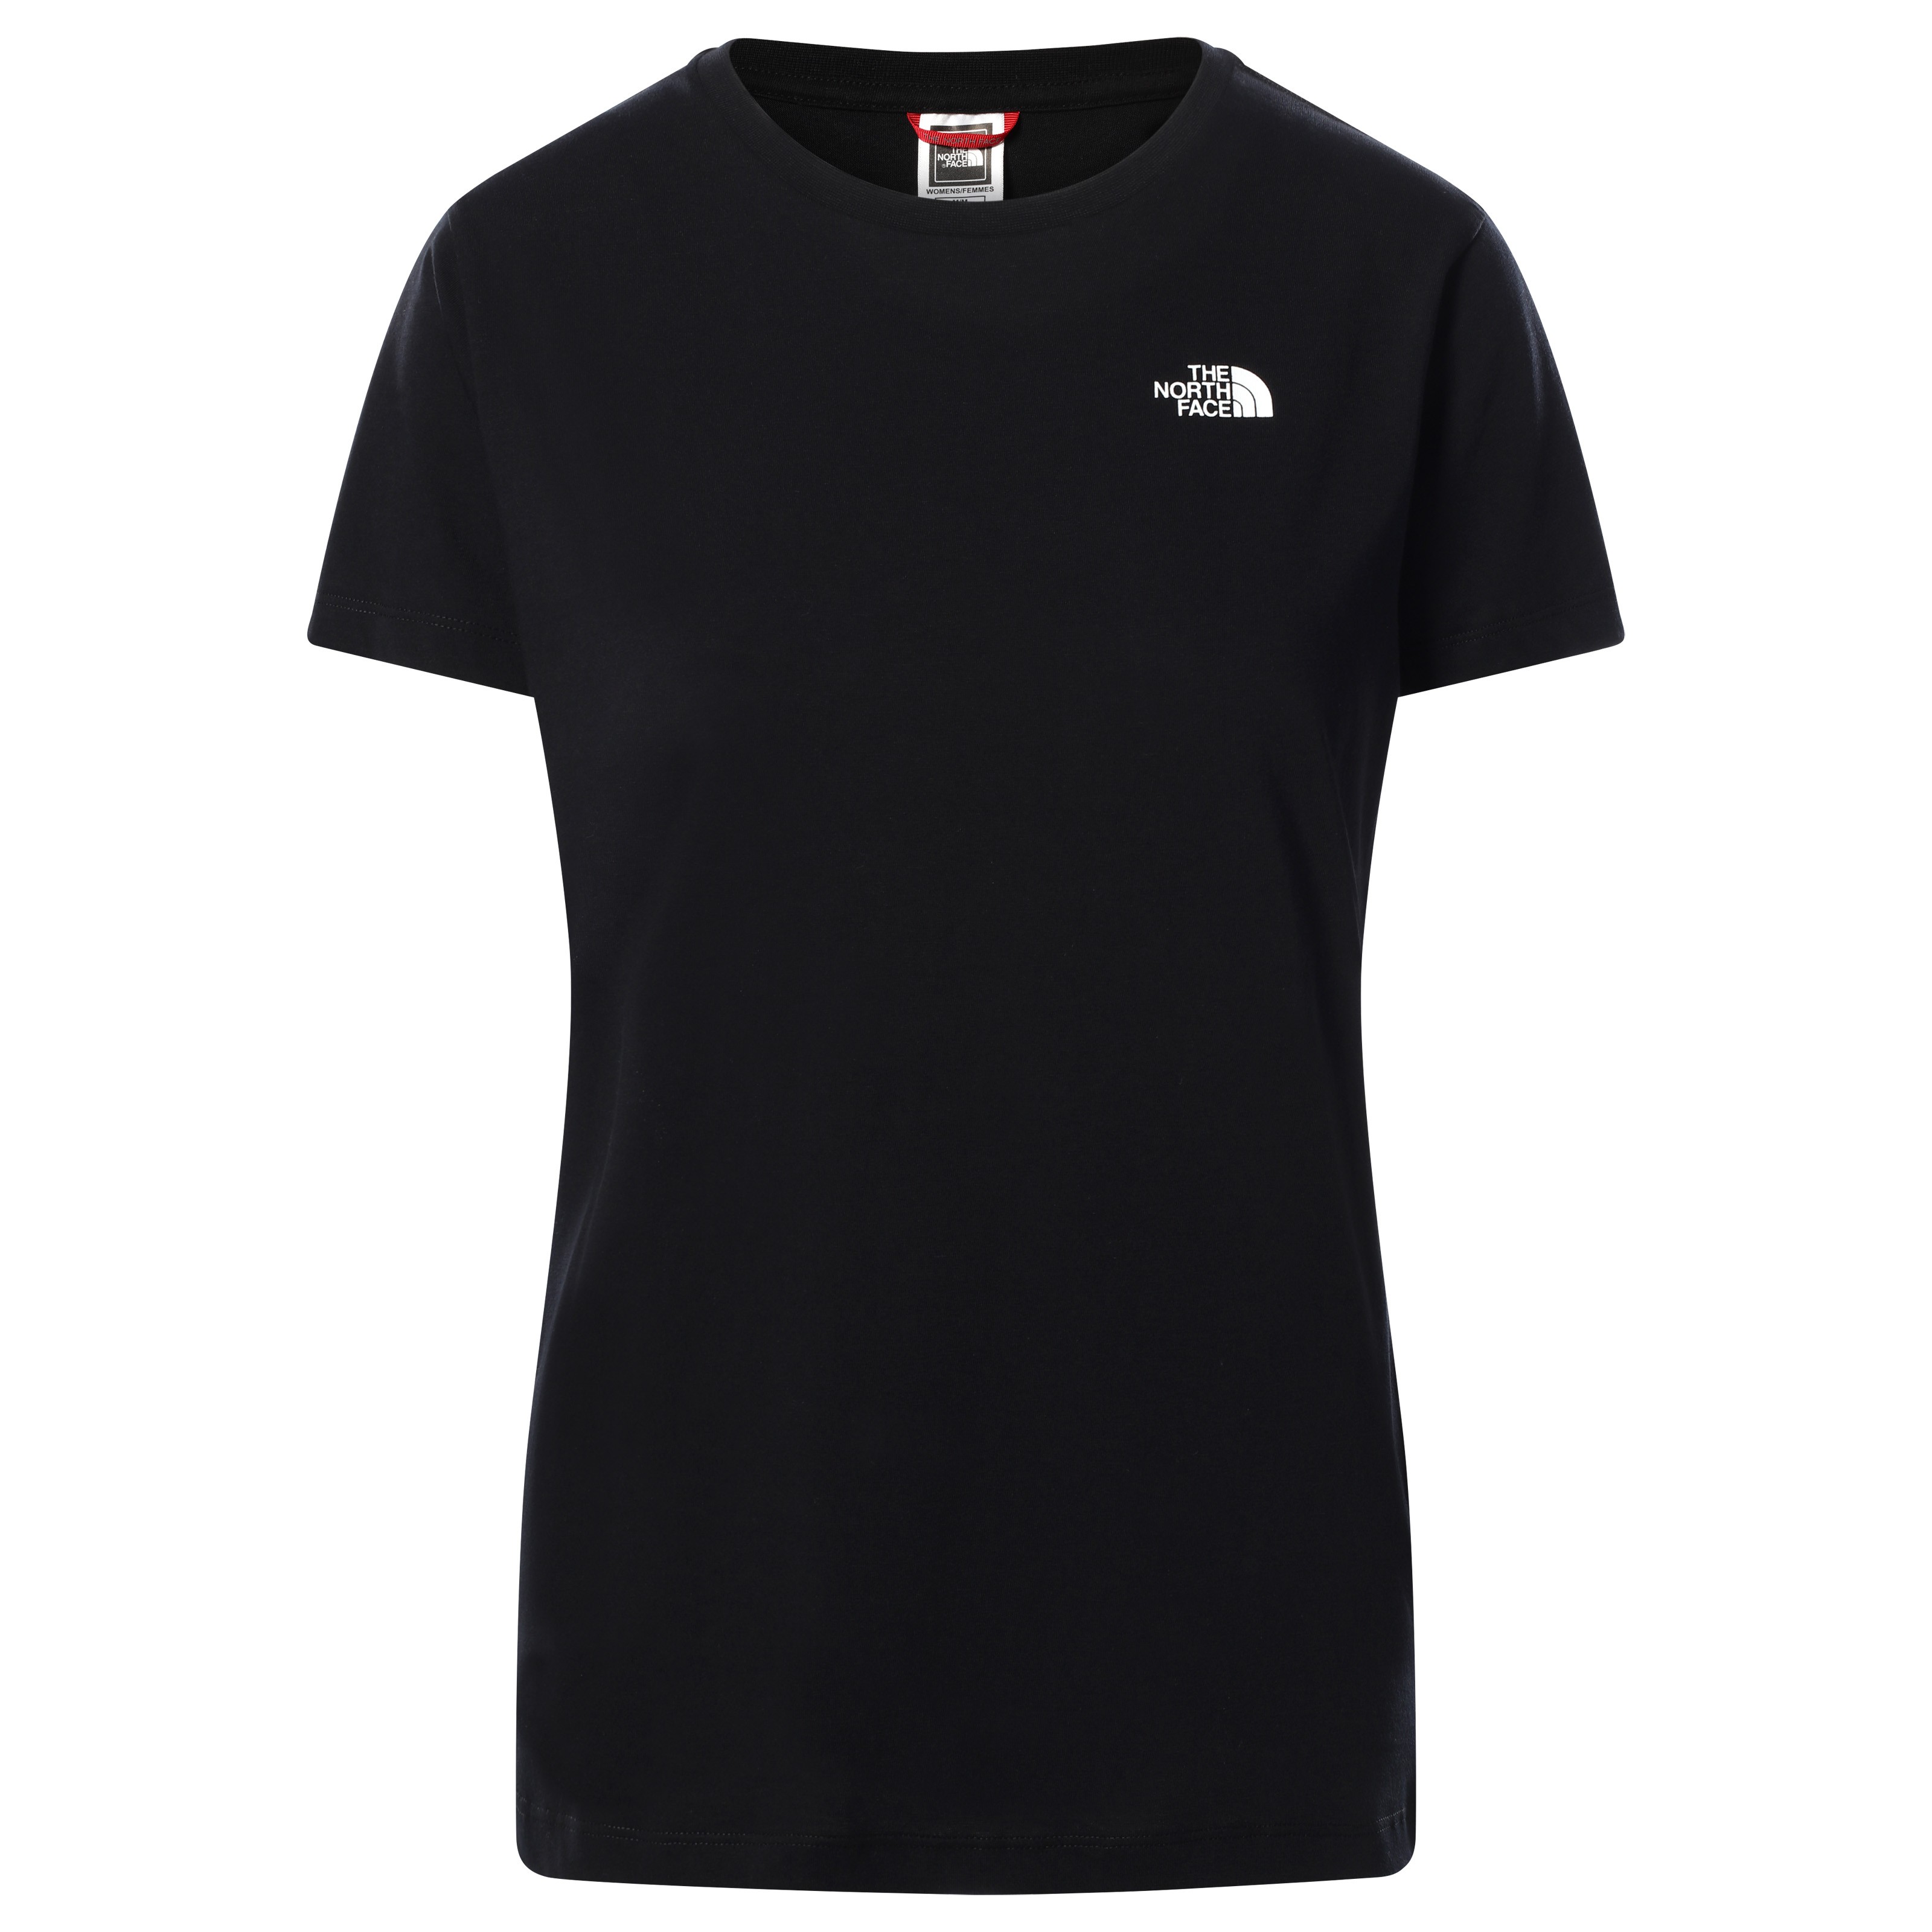 The North Face  The North Face - T-shirt Noir